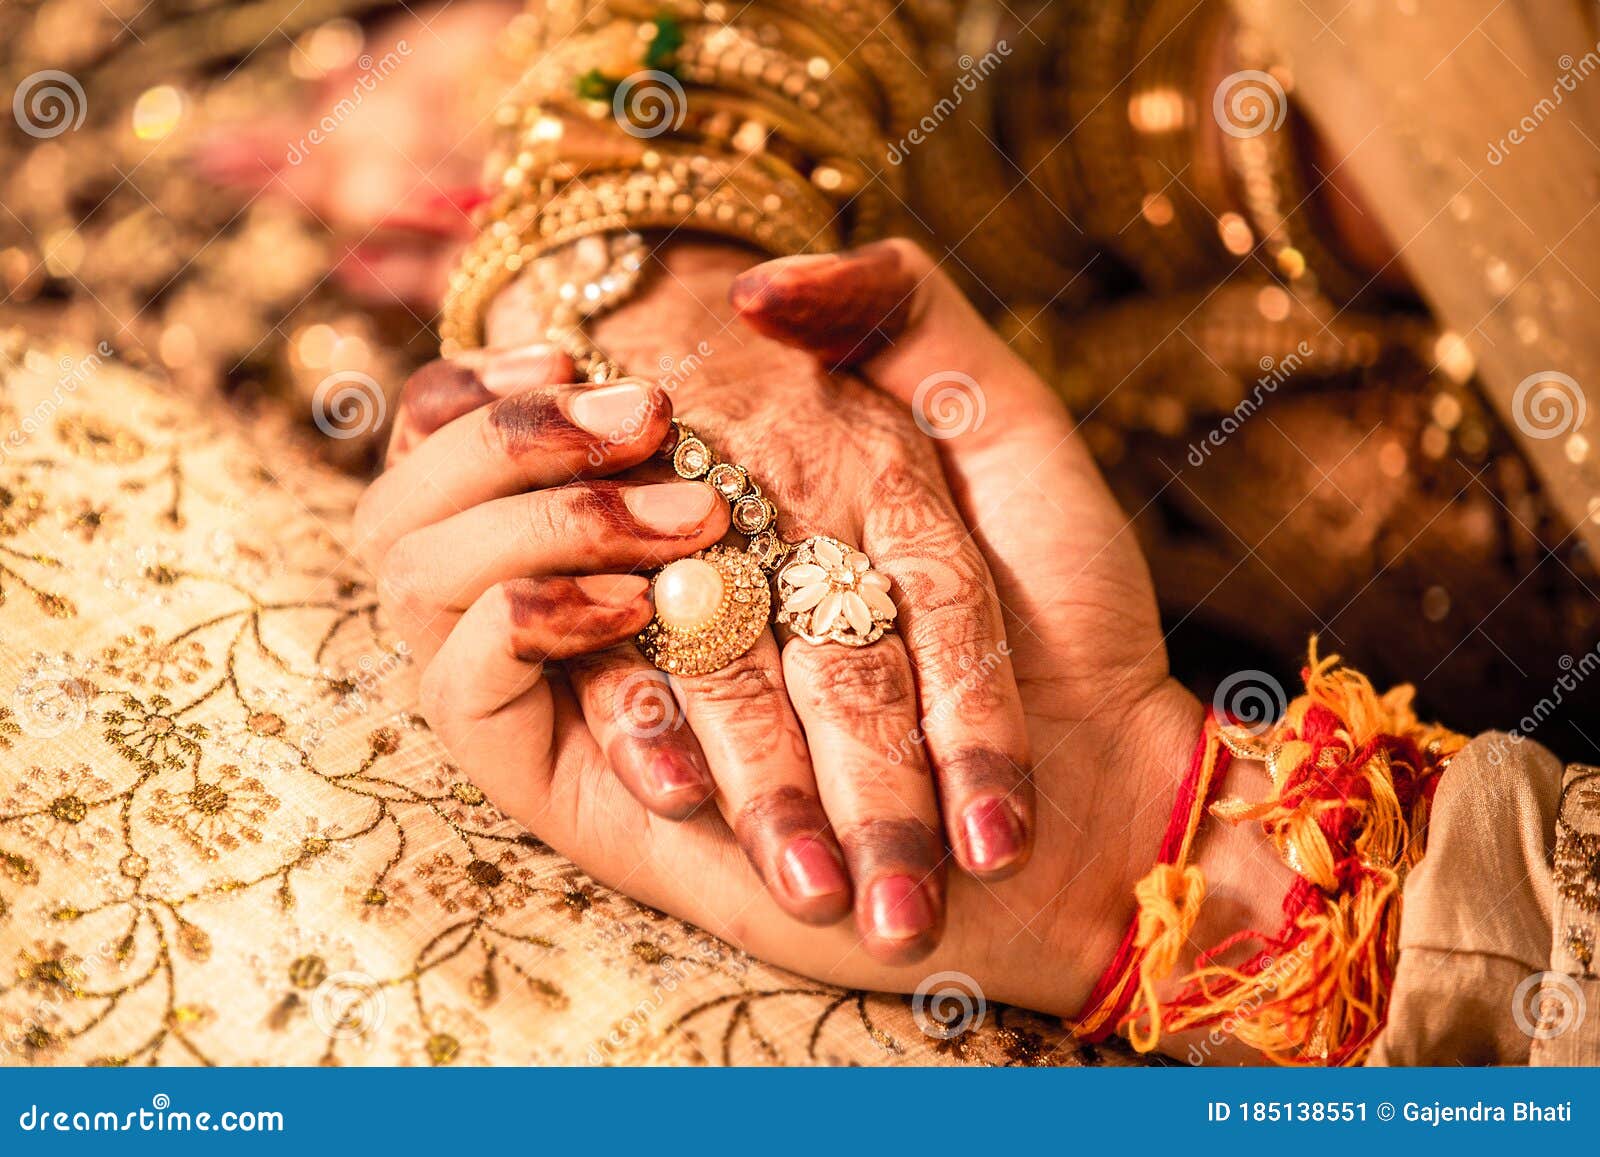 Young Married Couple Holding Hands, Indian Ceremony Wedding Day ...